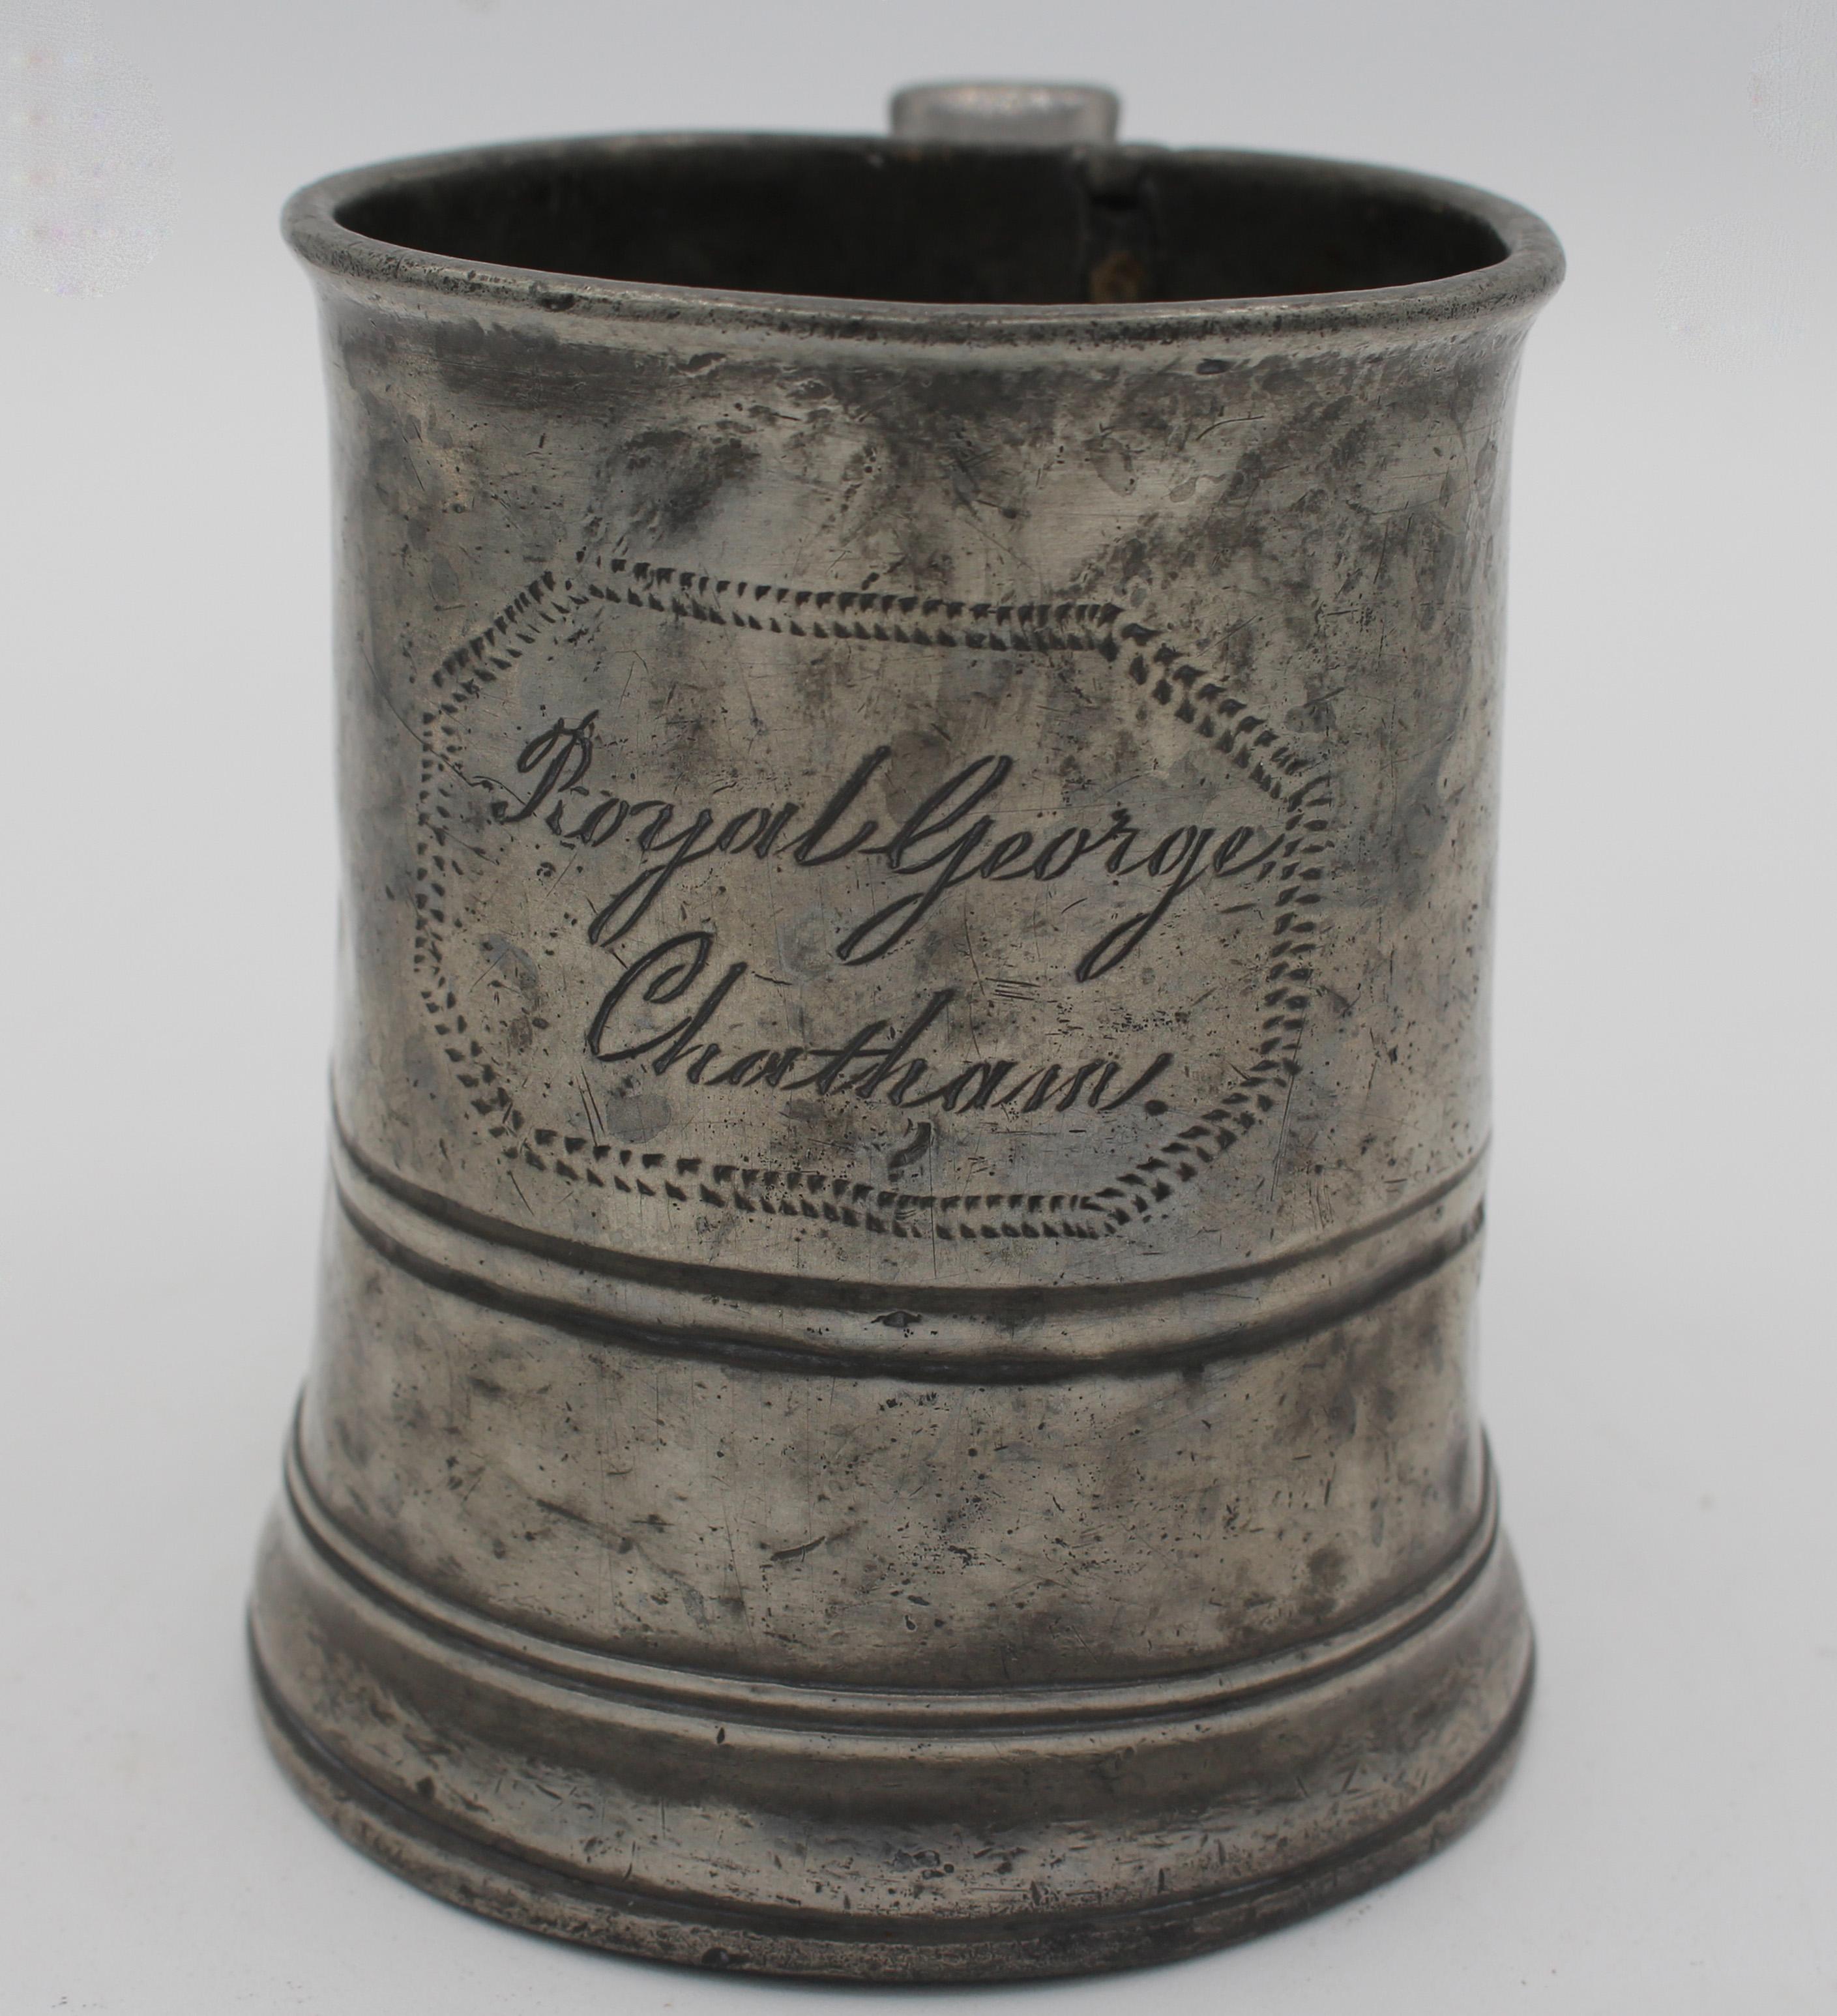 A pewter taper sided tankard from the Royal George Pub, Chatham. Pint size. Mark of a rearing horse in a shield, #6. Mid-19th century. Charles Dickens' country home Gad's Hill Place, was near Chatham and his happiest youthful days were in Chatham,